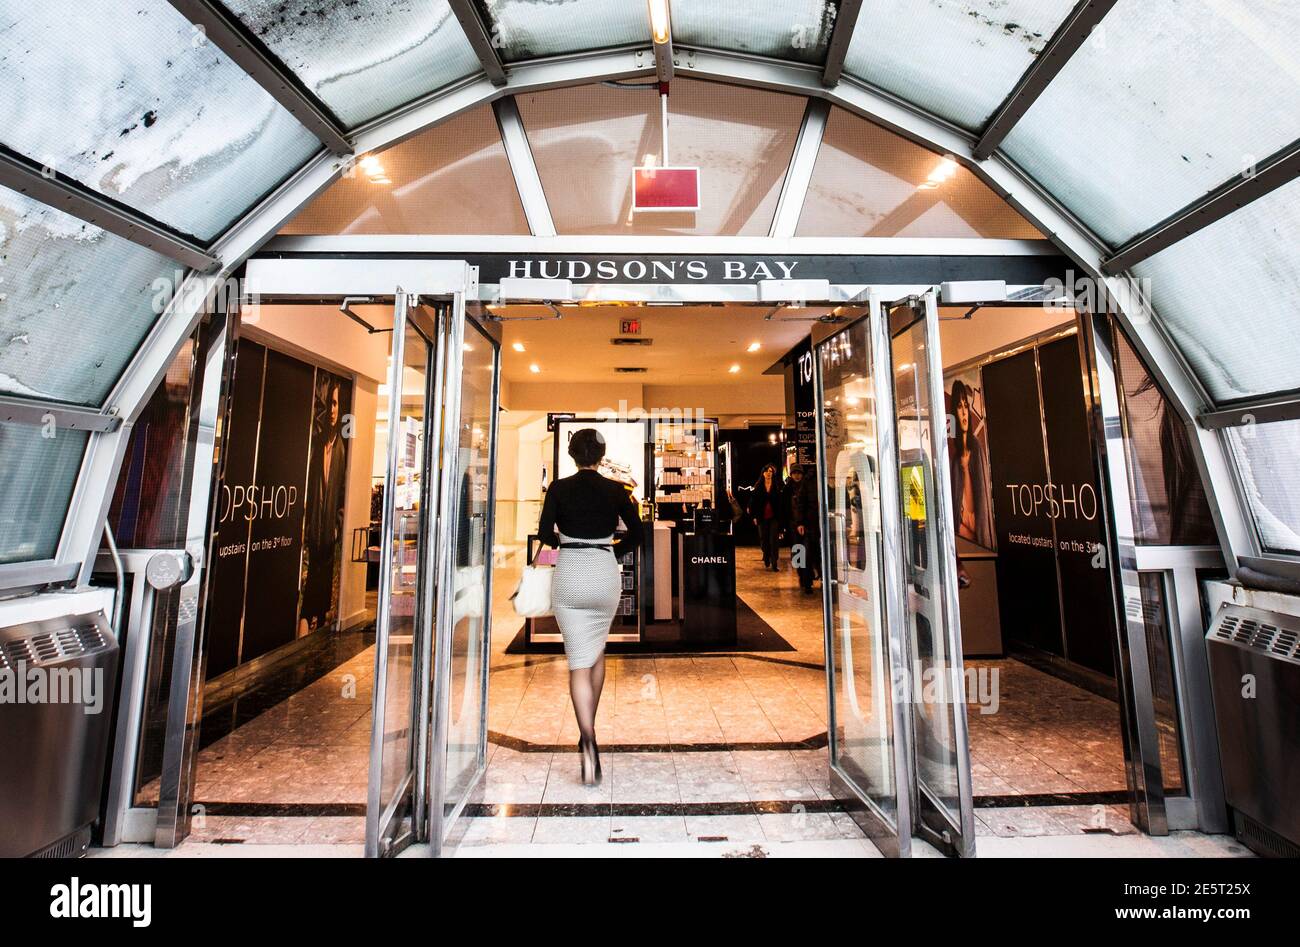 A woman walks through the doors at the Hudson's Bay Company (HBC) flagship  department store in Toronto January 27, 2014. Hudson's Bay Co said on  Monday that it would sell its flagship